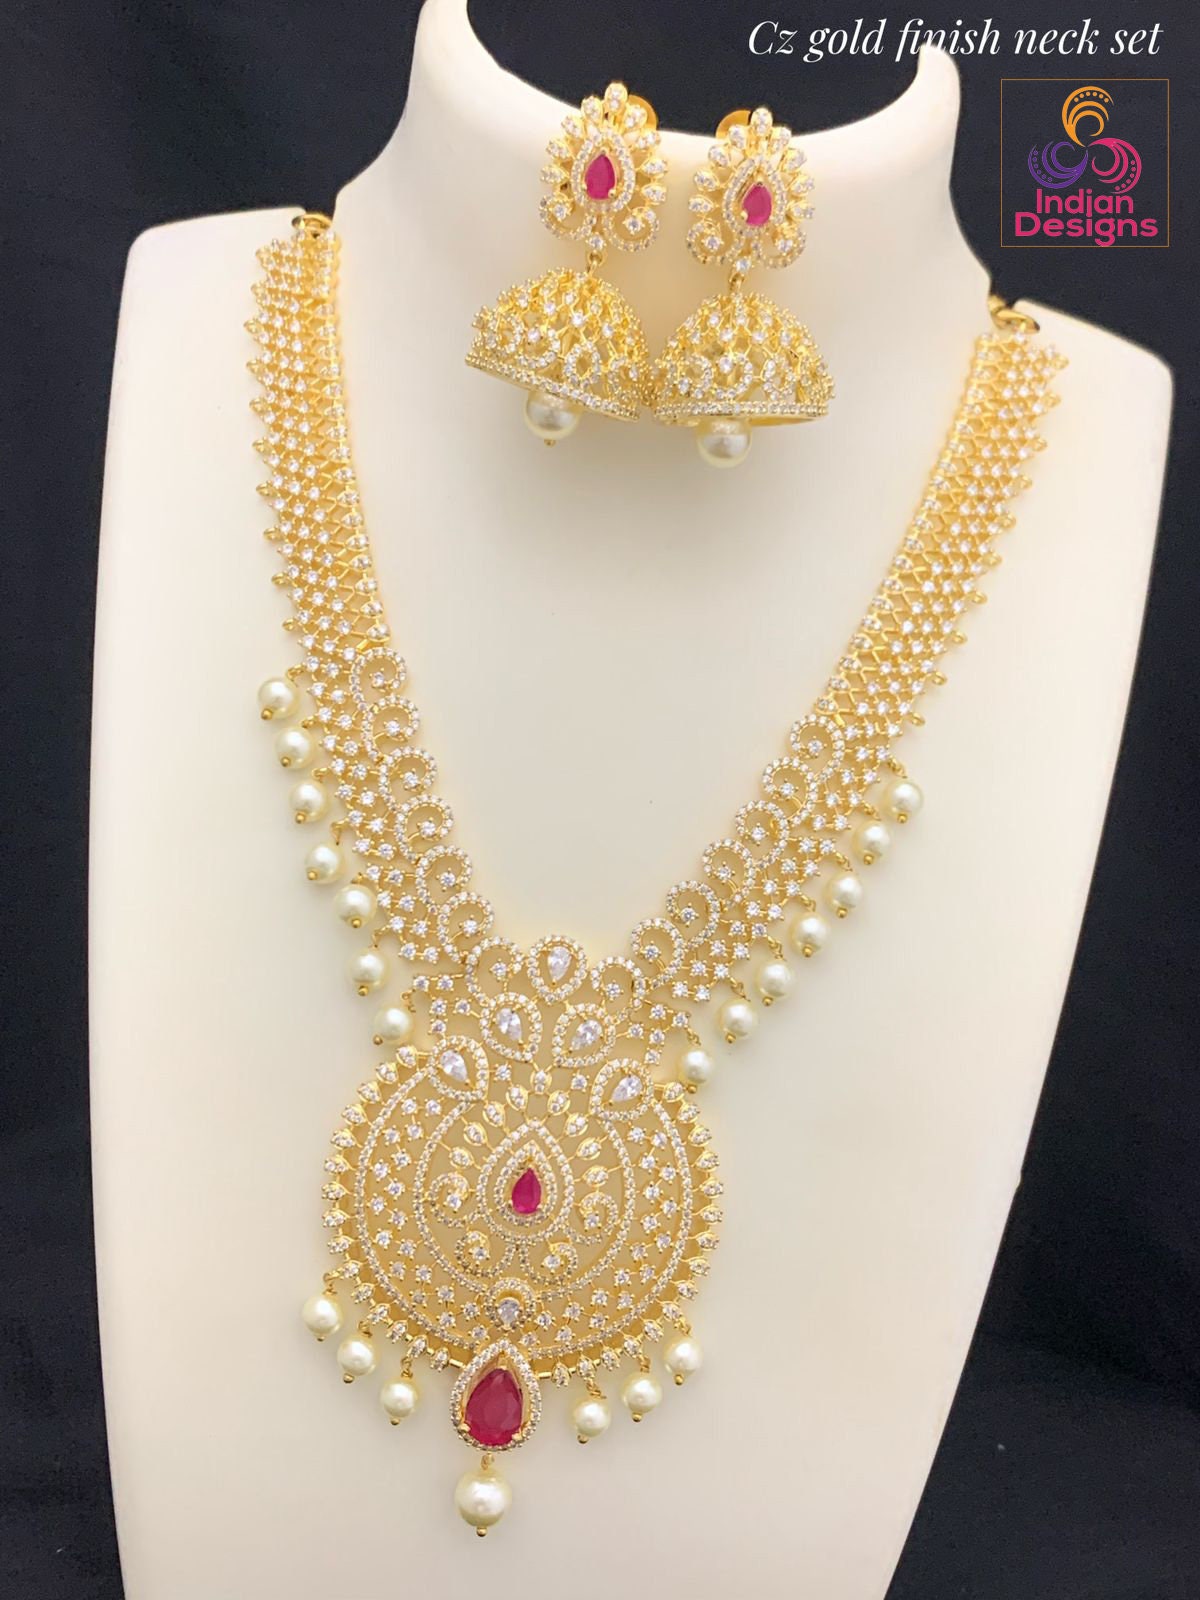 Unique Design American Diamond Necklace set | Gold plated Ruby AD Necklace with Pearl - Jhumka Earrings | South Indian Style Wedding jewelry